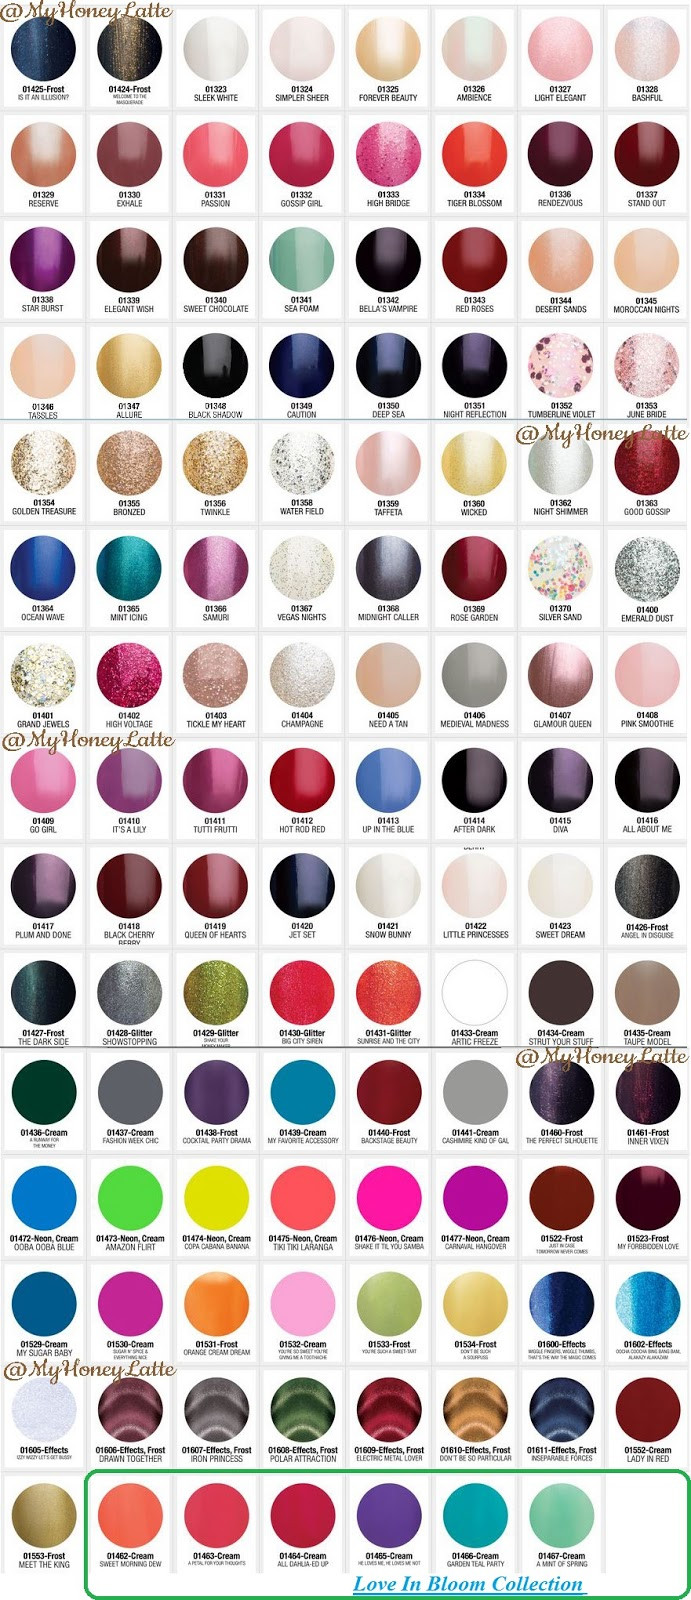 Gelish Nail Colors
 MyHoneyLatte Gelish color swatches Gel Manicure Must